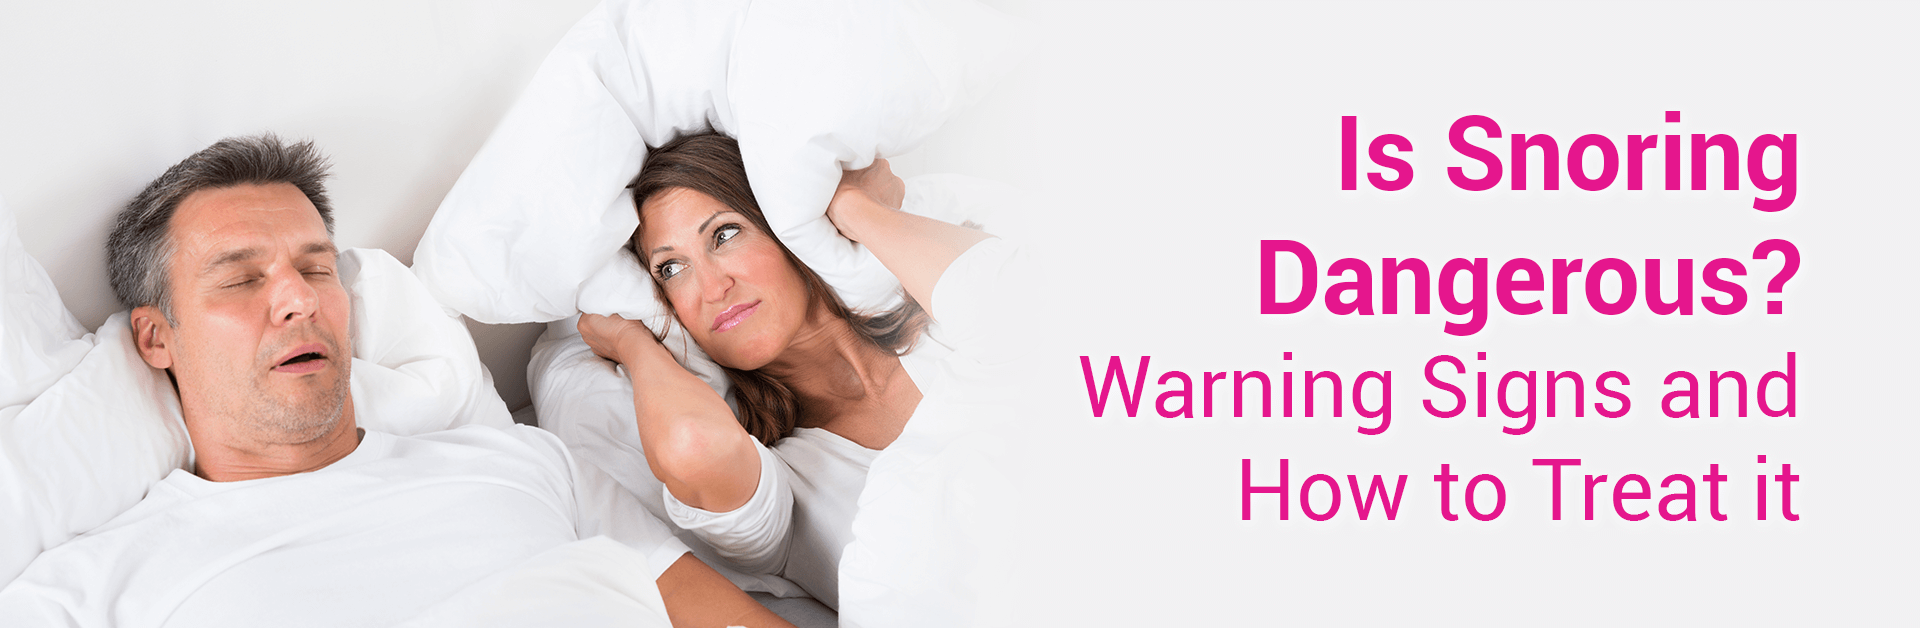 IS SNORING DANGEROUS? WARNING SIGNS AND HOW TO TREAT IT